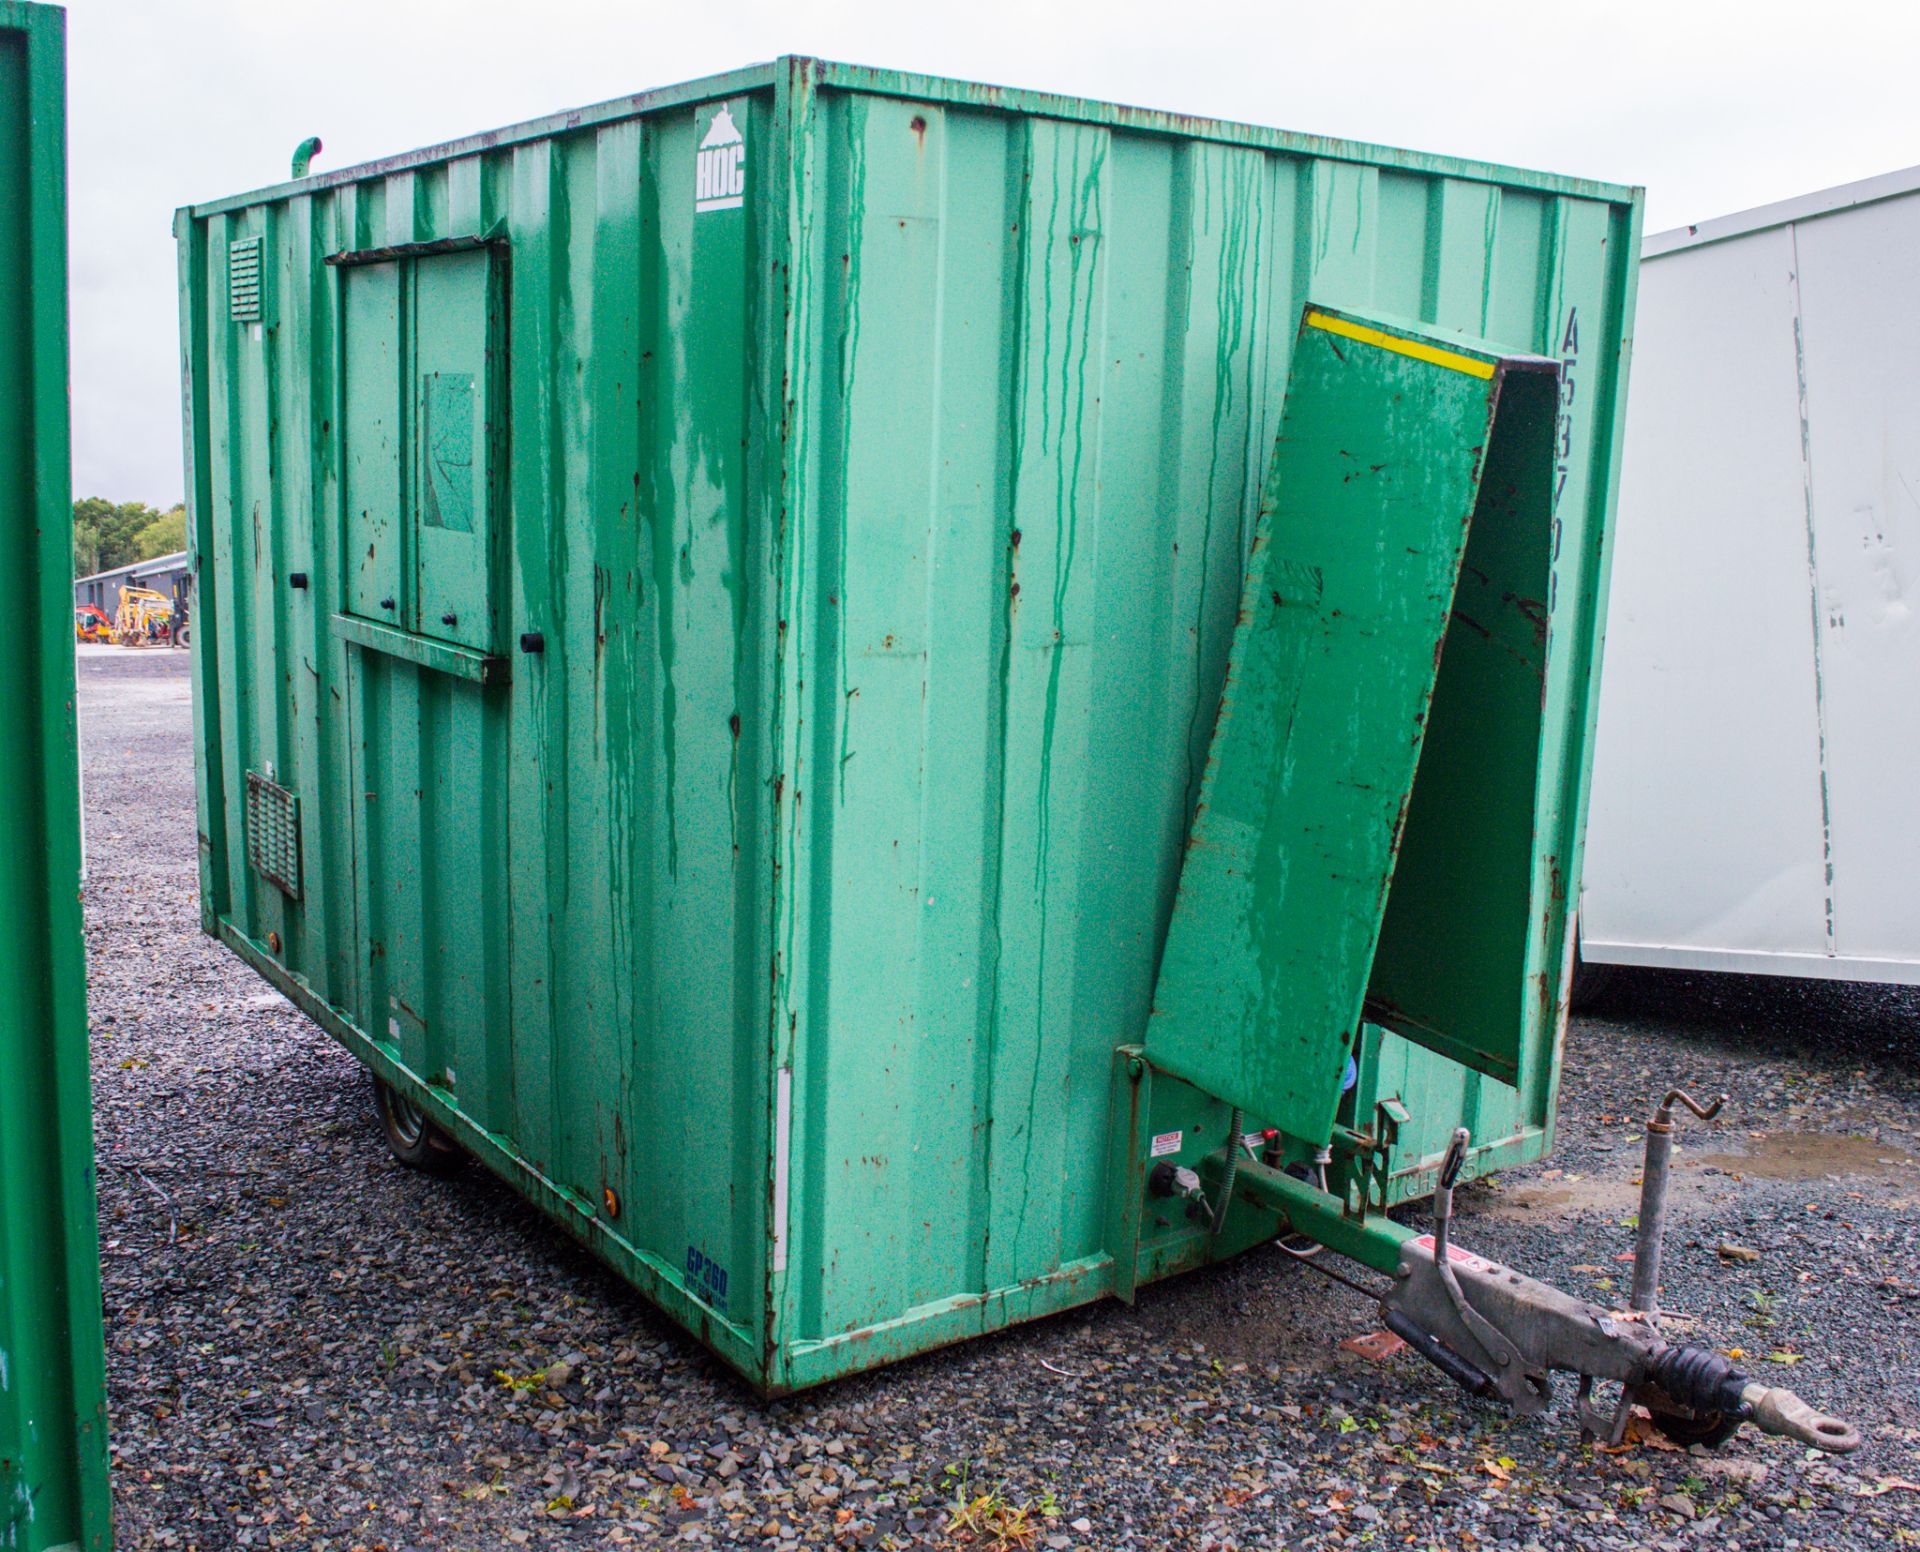 Ground Hog 12' by 8' fast tow self lowering welfare unit c/w canteen area, toilet room, generator - Image 3 of 13